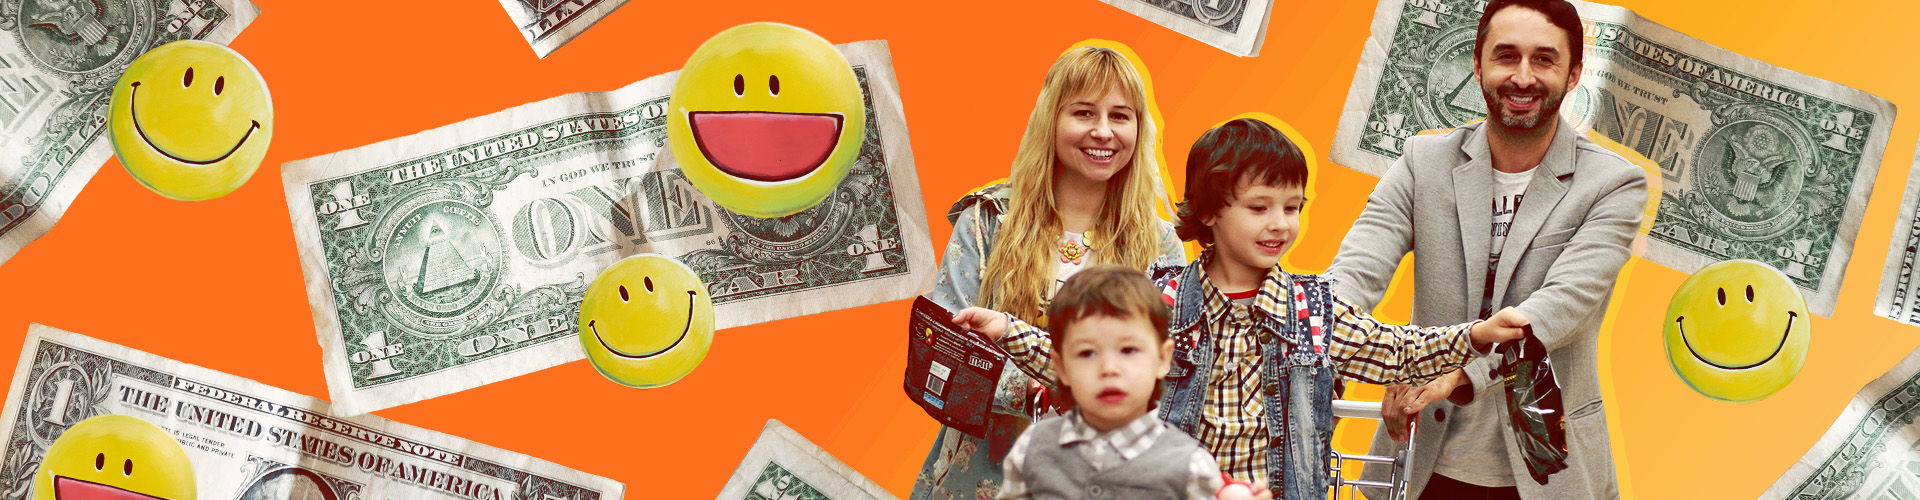 Happy family shopping banner